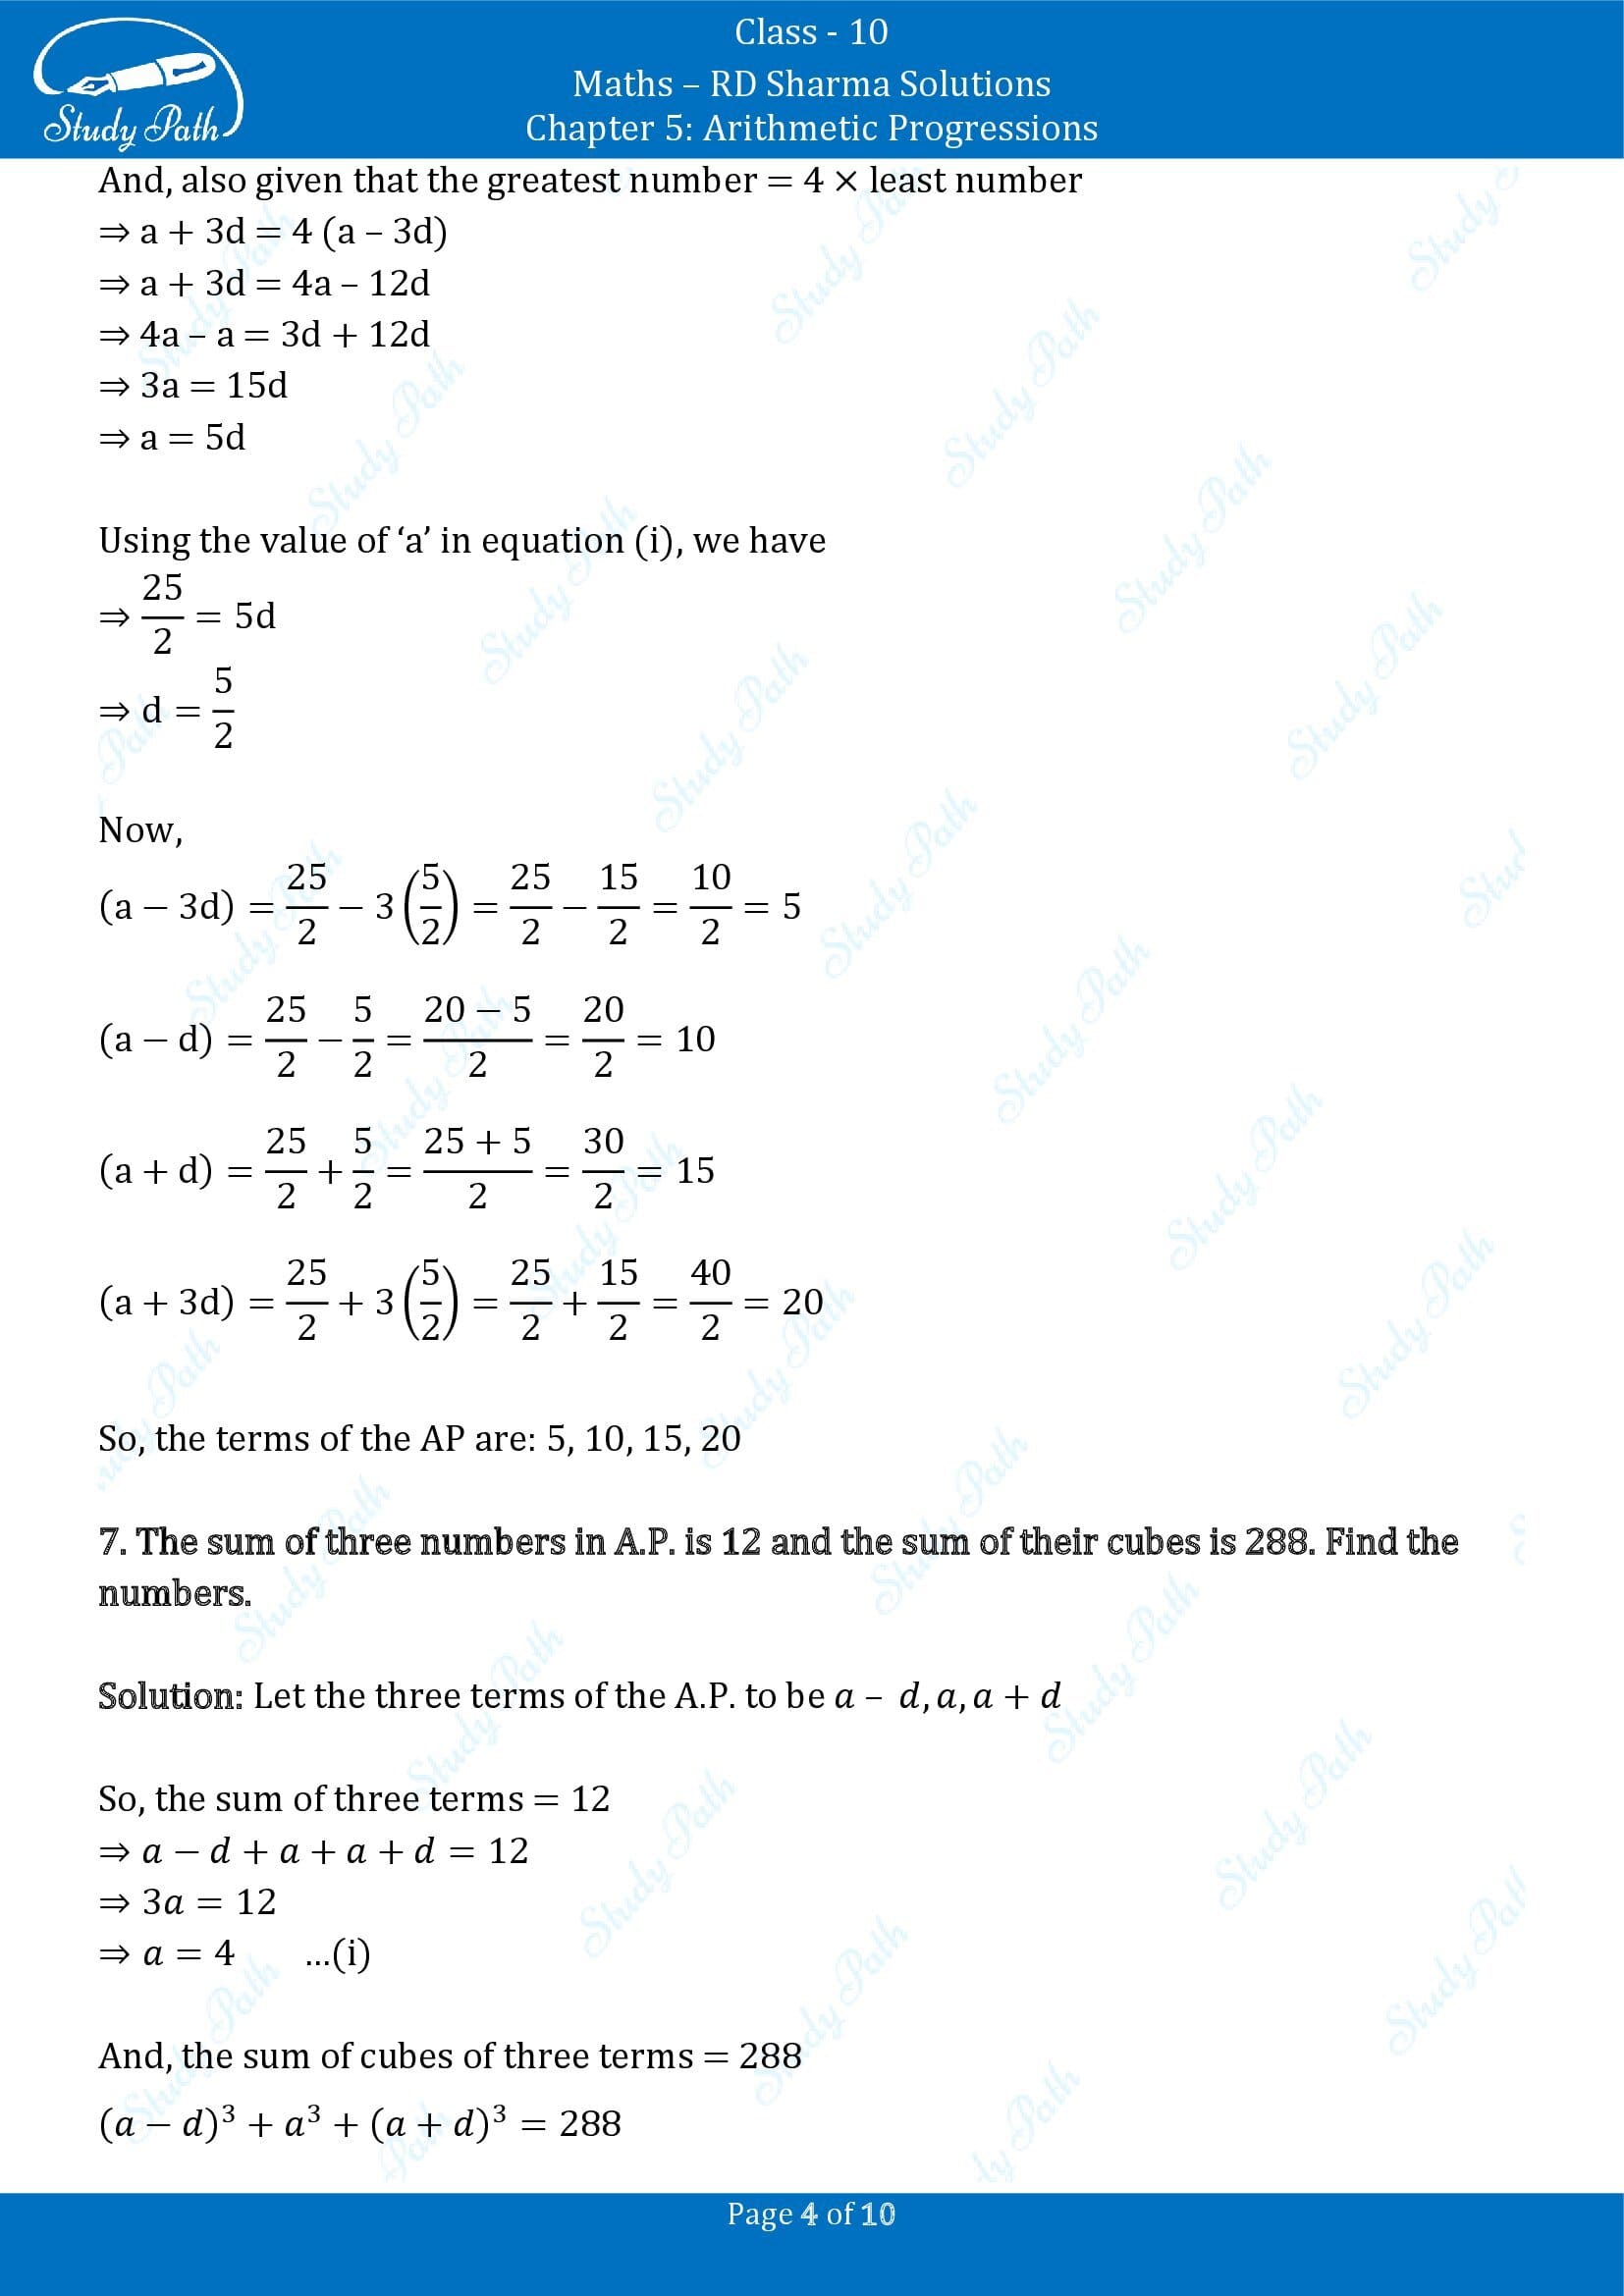 RD Sharma Solutions Class 10 Chapter 5 Arithmetic Progressions Exercise 5.5 00004